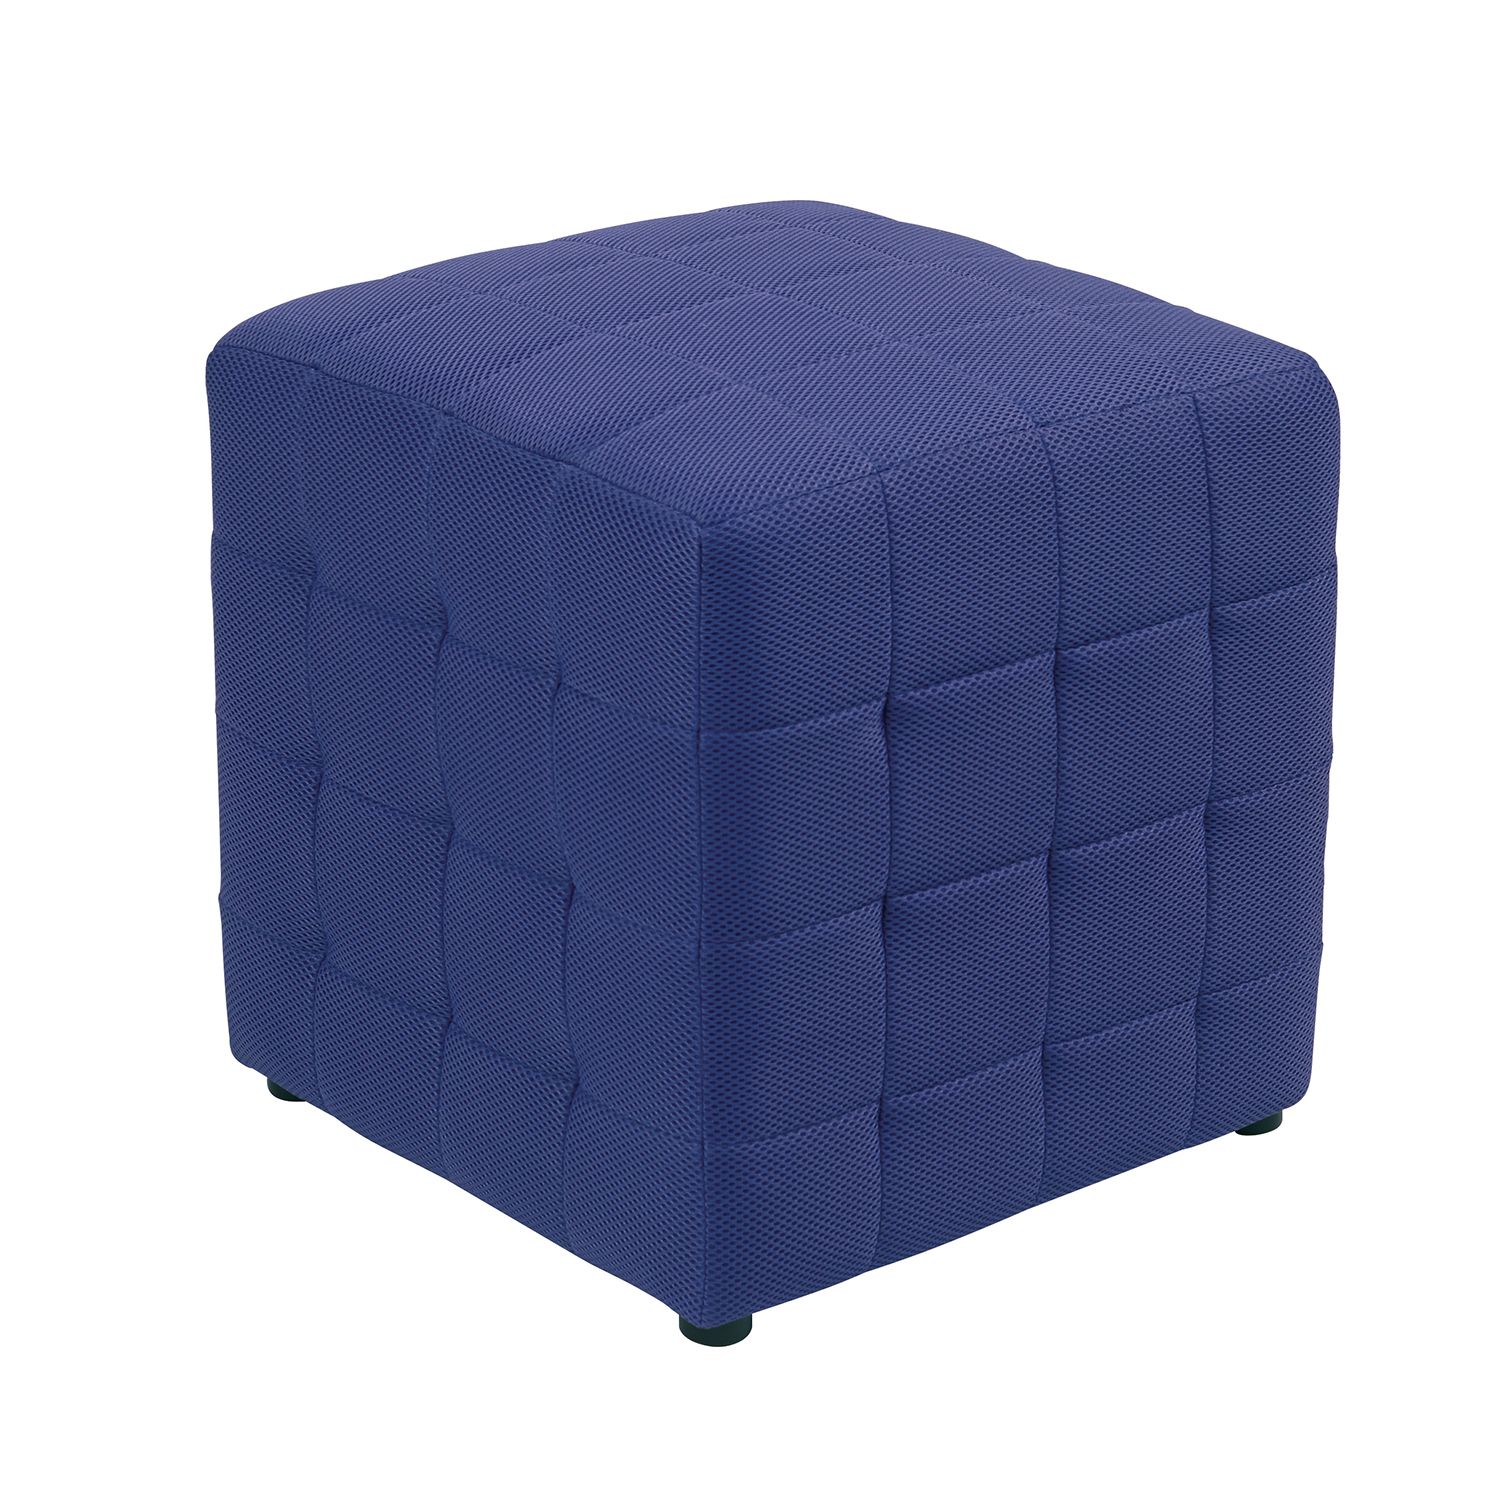 15" Cube Ottoman – Pier1 With Regard To Solid Cuboid Pouf Ottomans (View 8 of 20)